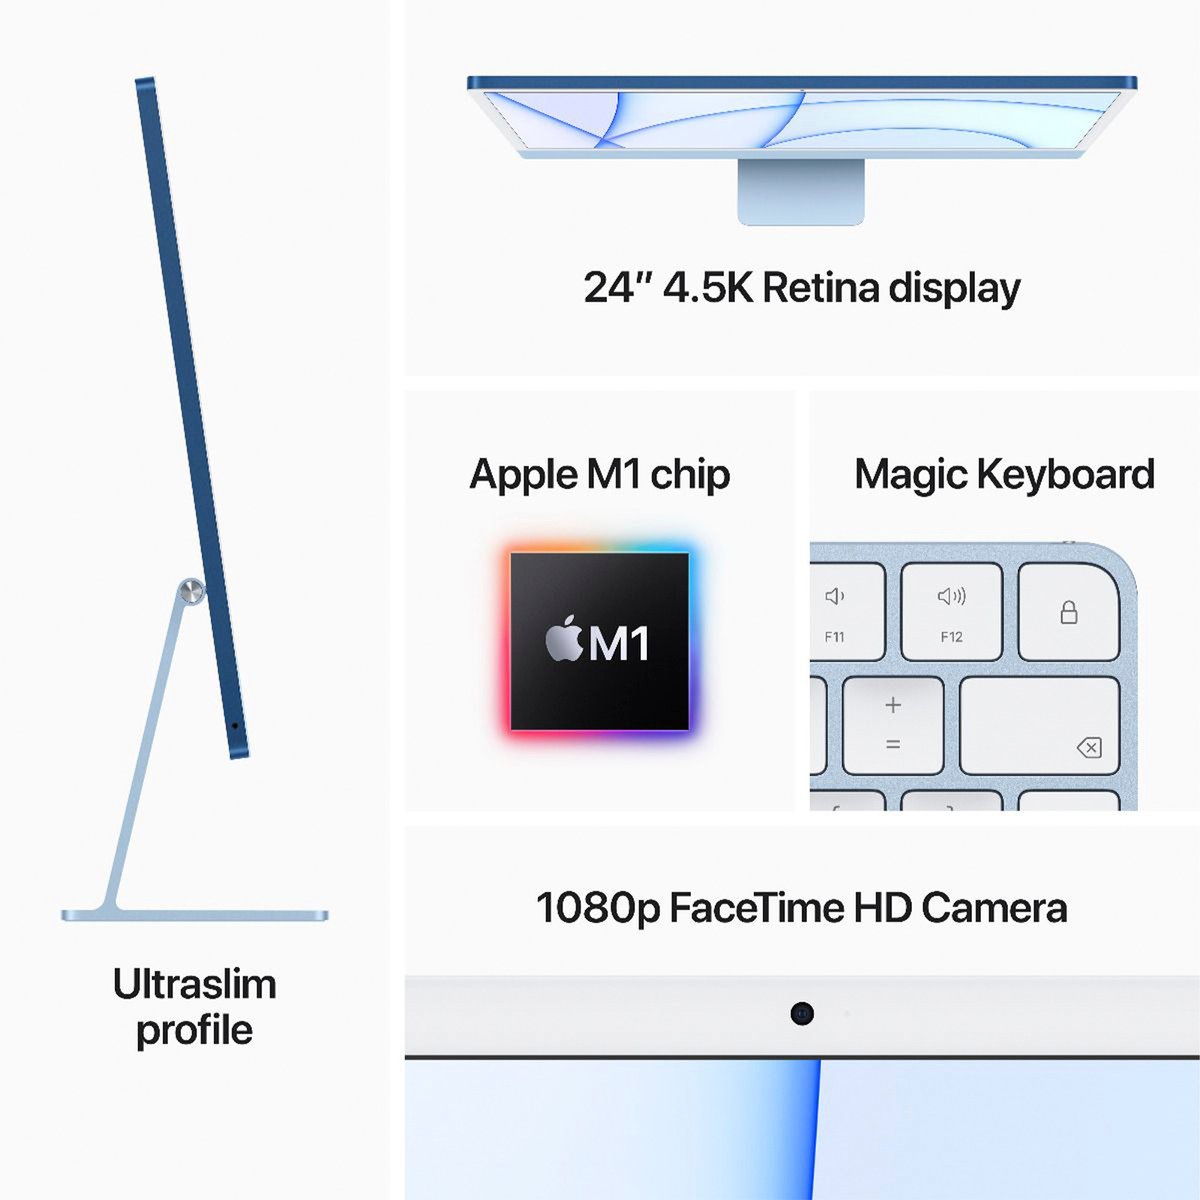 Apple 24-inch iMac with Retina 4.5K display: Apple M1 chip with 8‑core CPU and 7‑core GPU, 256GB - Blue (MJV93ZS/A) English Keyboard